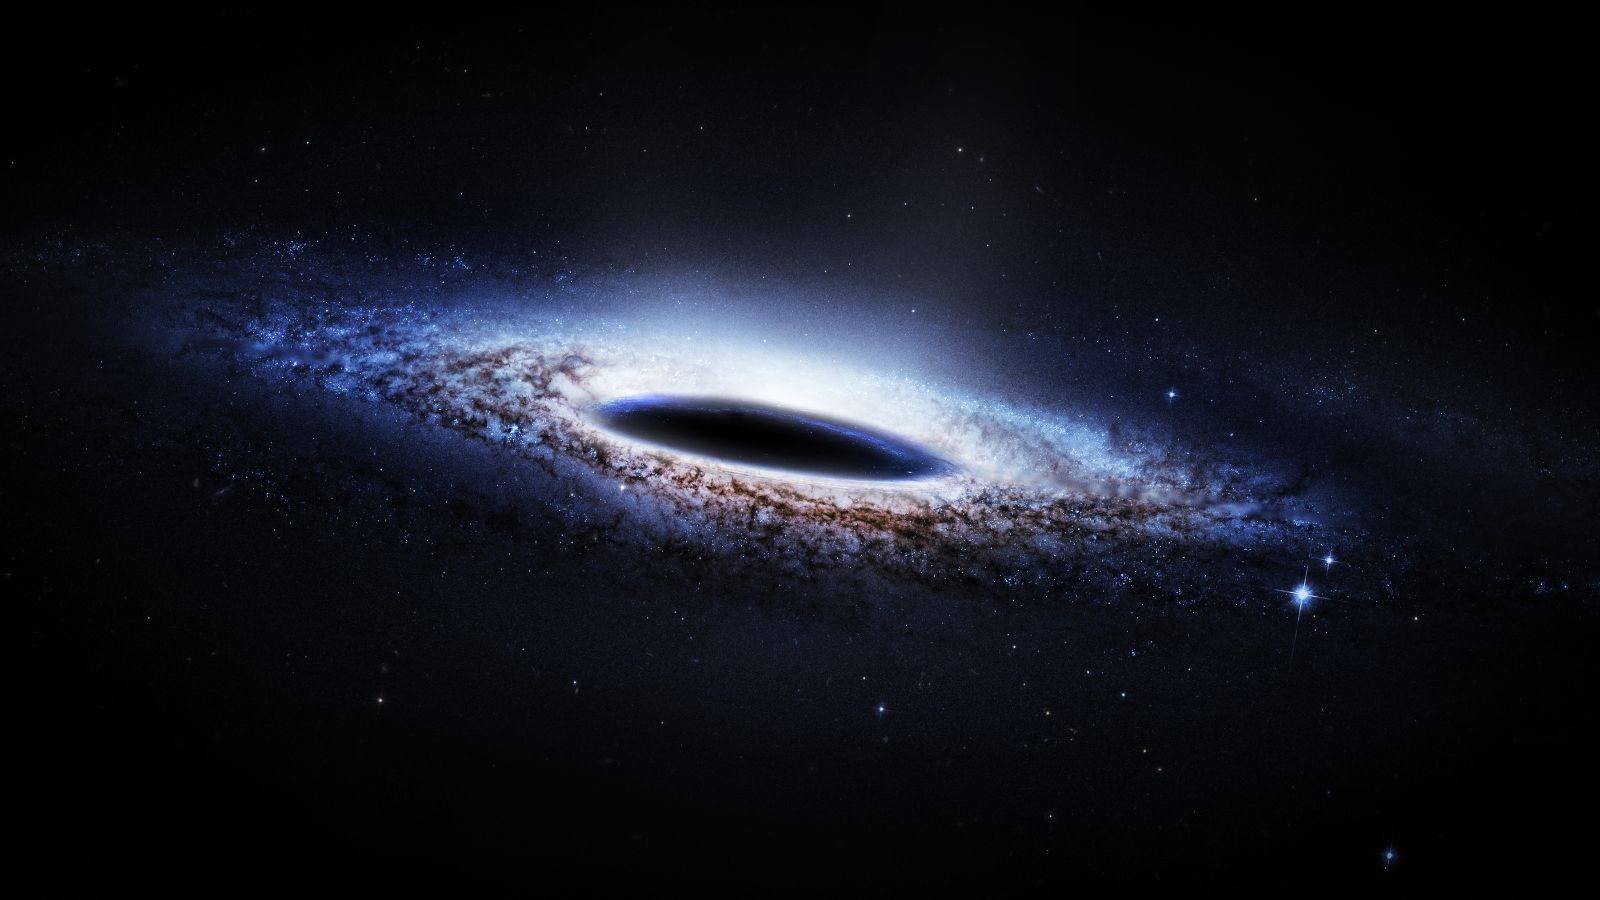 <p>The properties and behavior of black holes are still unknown. Even though they’ve been studied to great lengths, they’re not fully understood. Black holes are largely misunderstood due to general relativity and quantum mechanics theories being different from one another. There are still many theories about how they’re created, and it’s something we may never fully know.  </p>